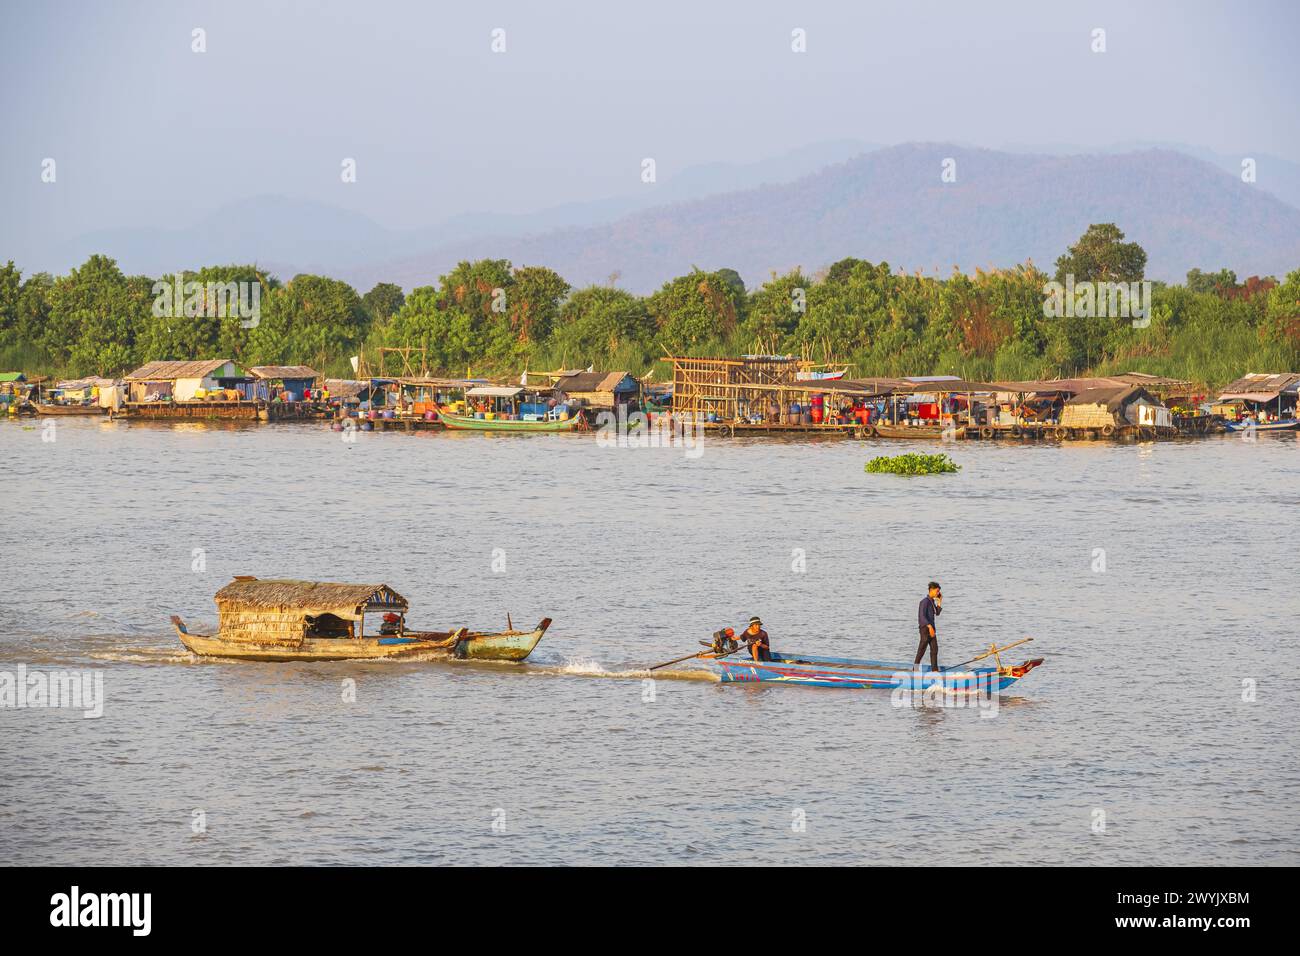 Cambodia, Kampong Chhnang, the banks of the Tonle Sap river, community of Vietnamese and Muslim Chams living on the river Stock Photo